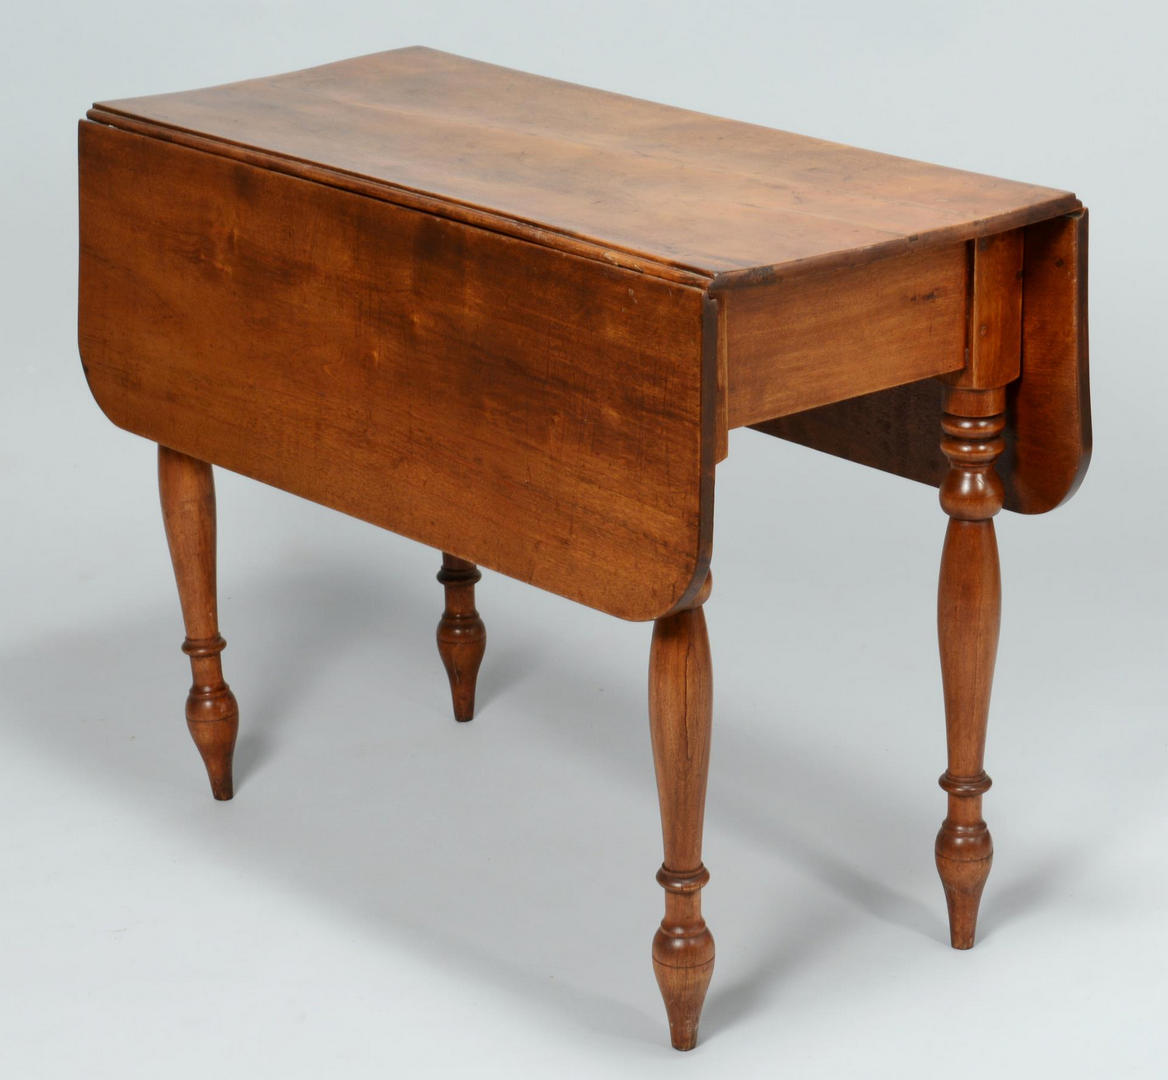 Lot 291: Two Drop Leaf Tables, Rounded Leaves